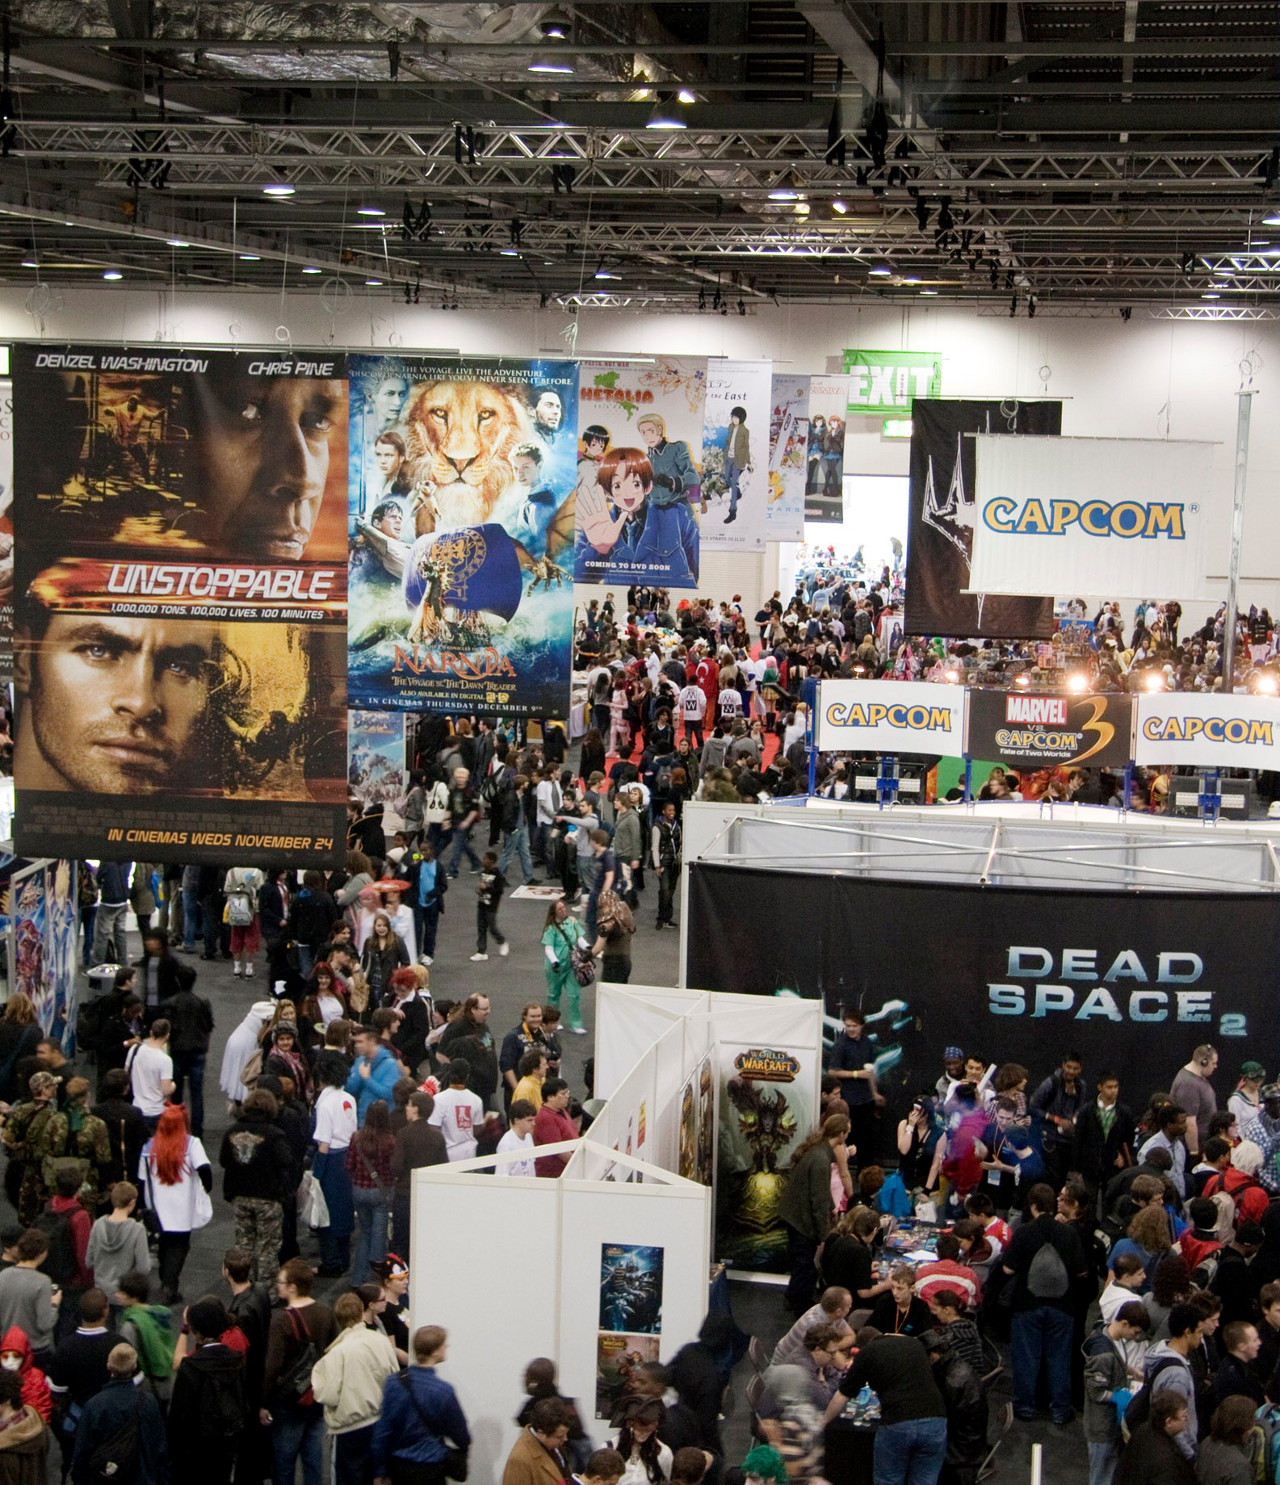 Games Expo